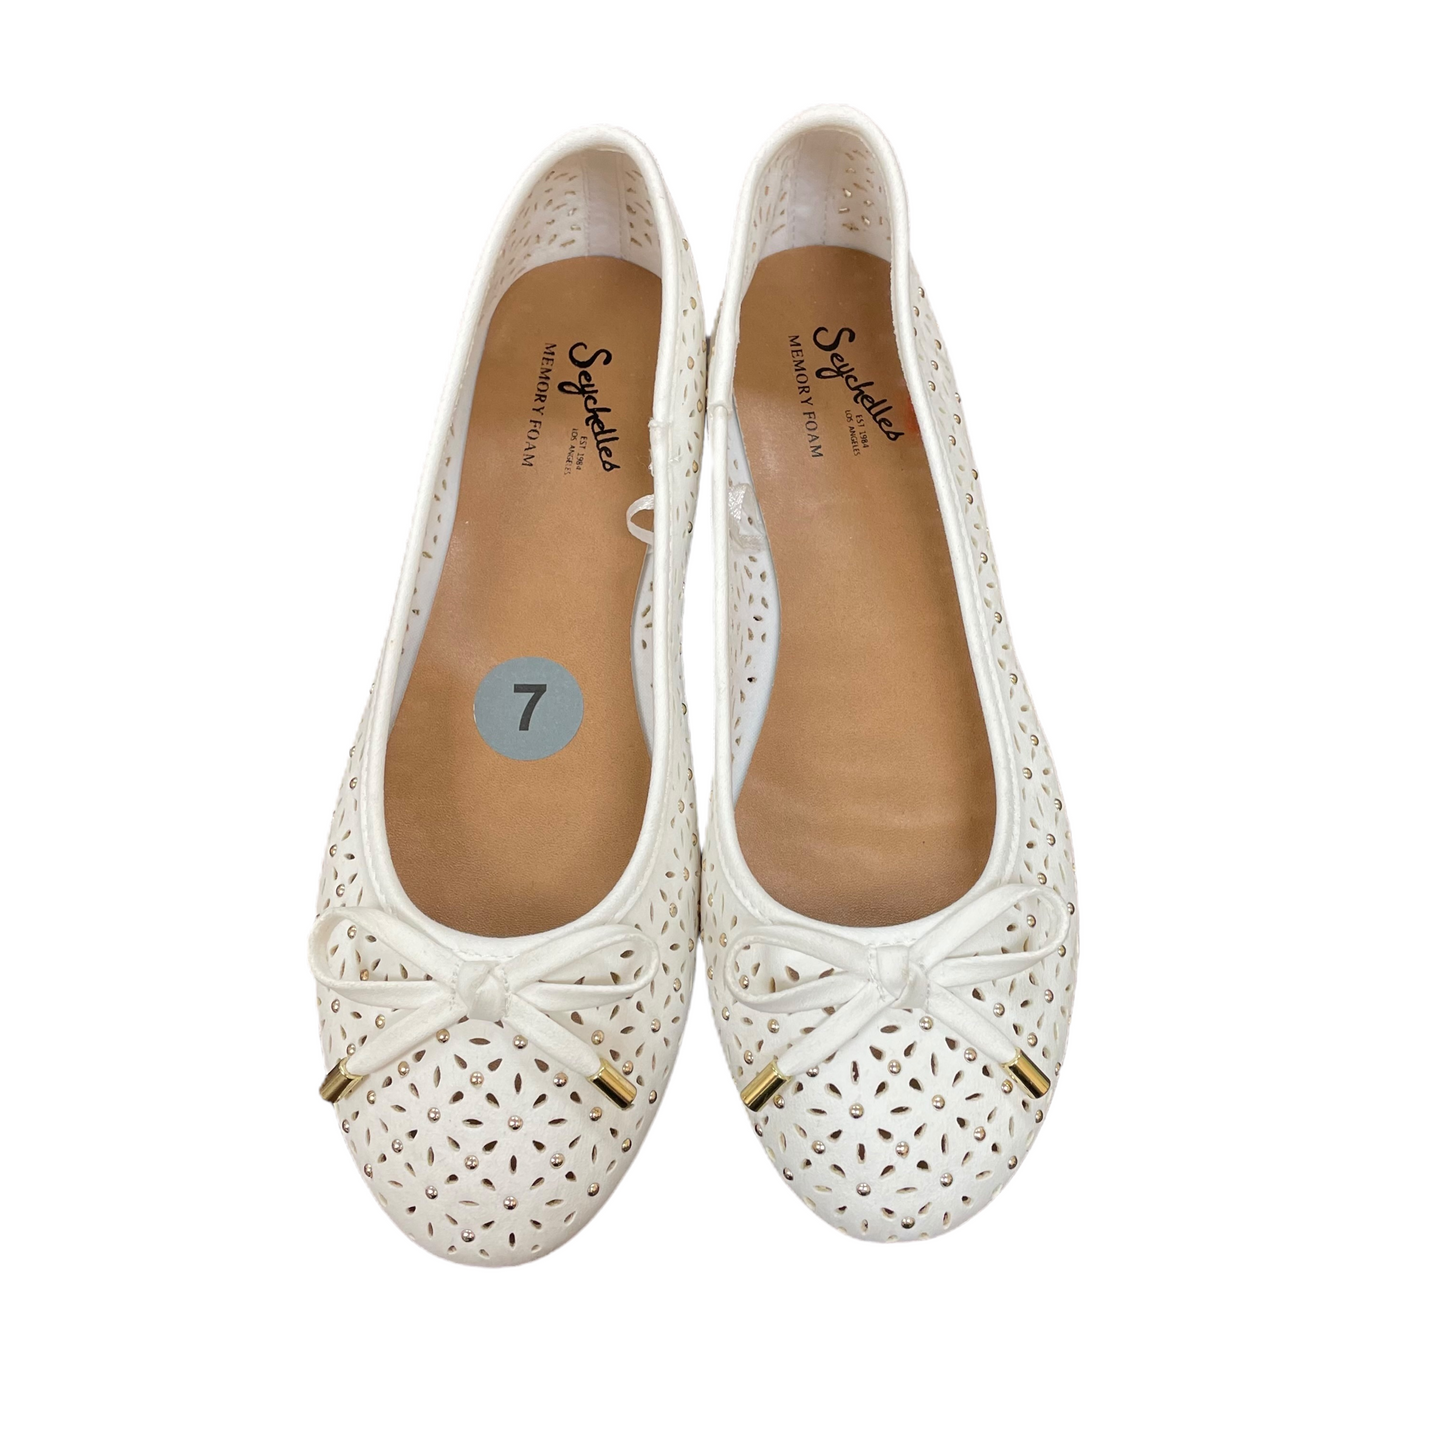 White Shoes Flats By Seychelles, Size: 7